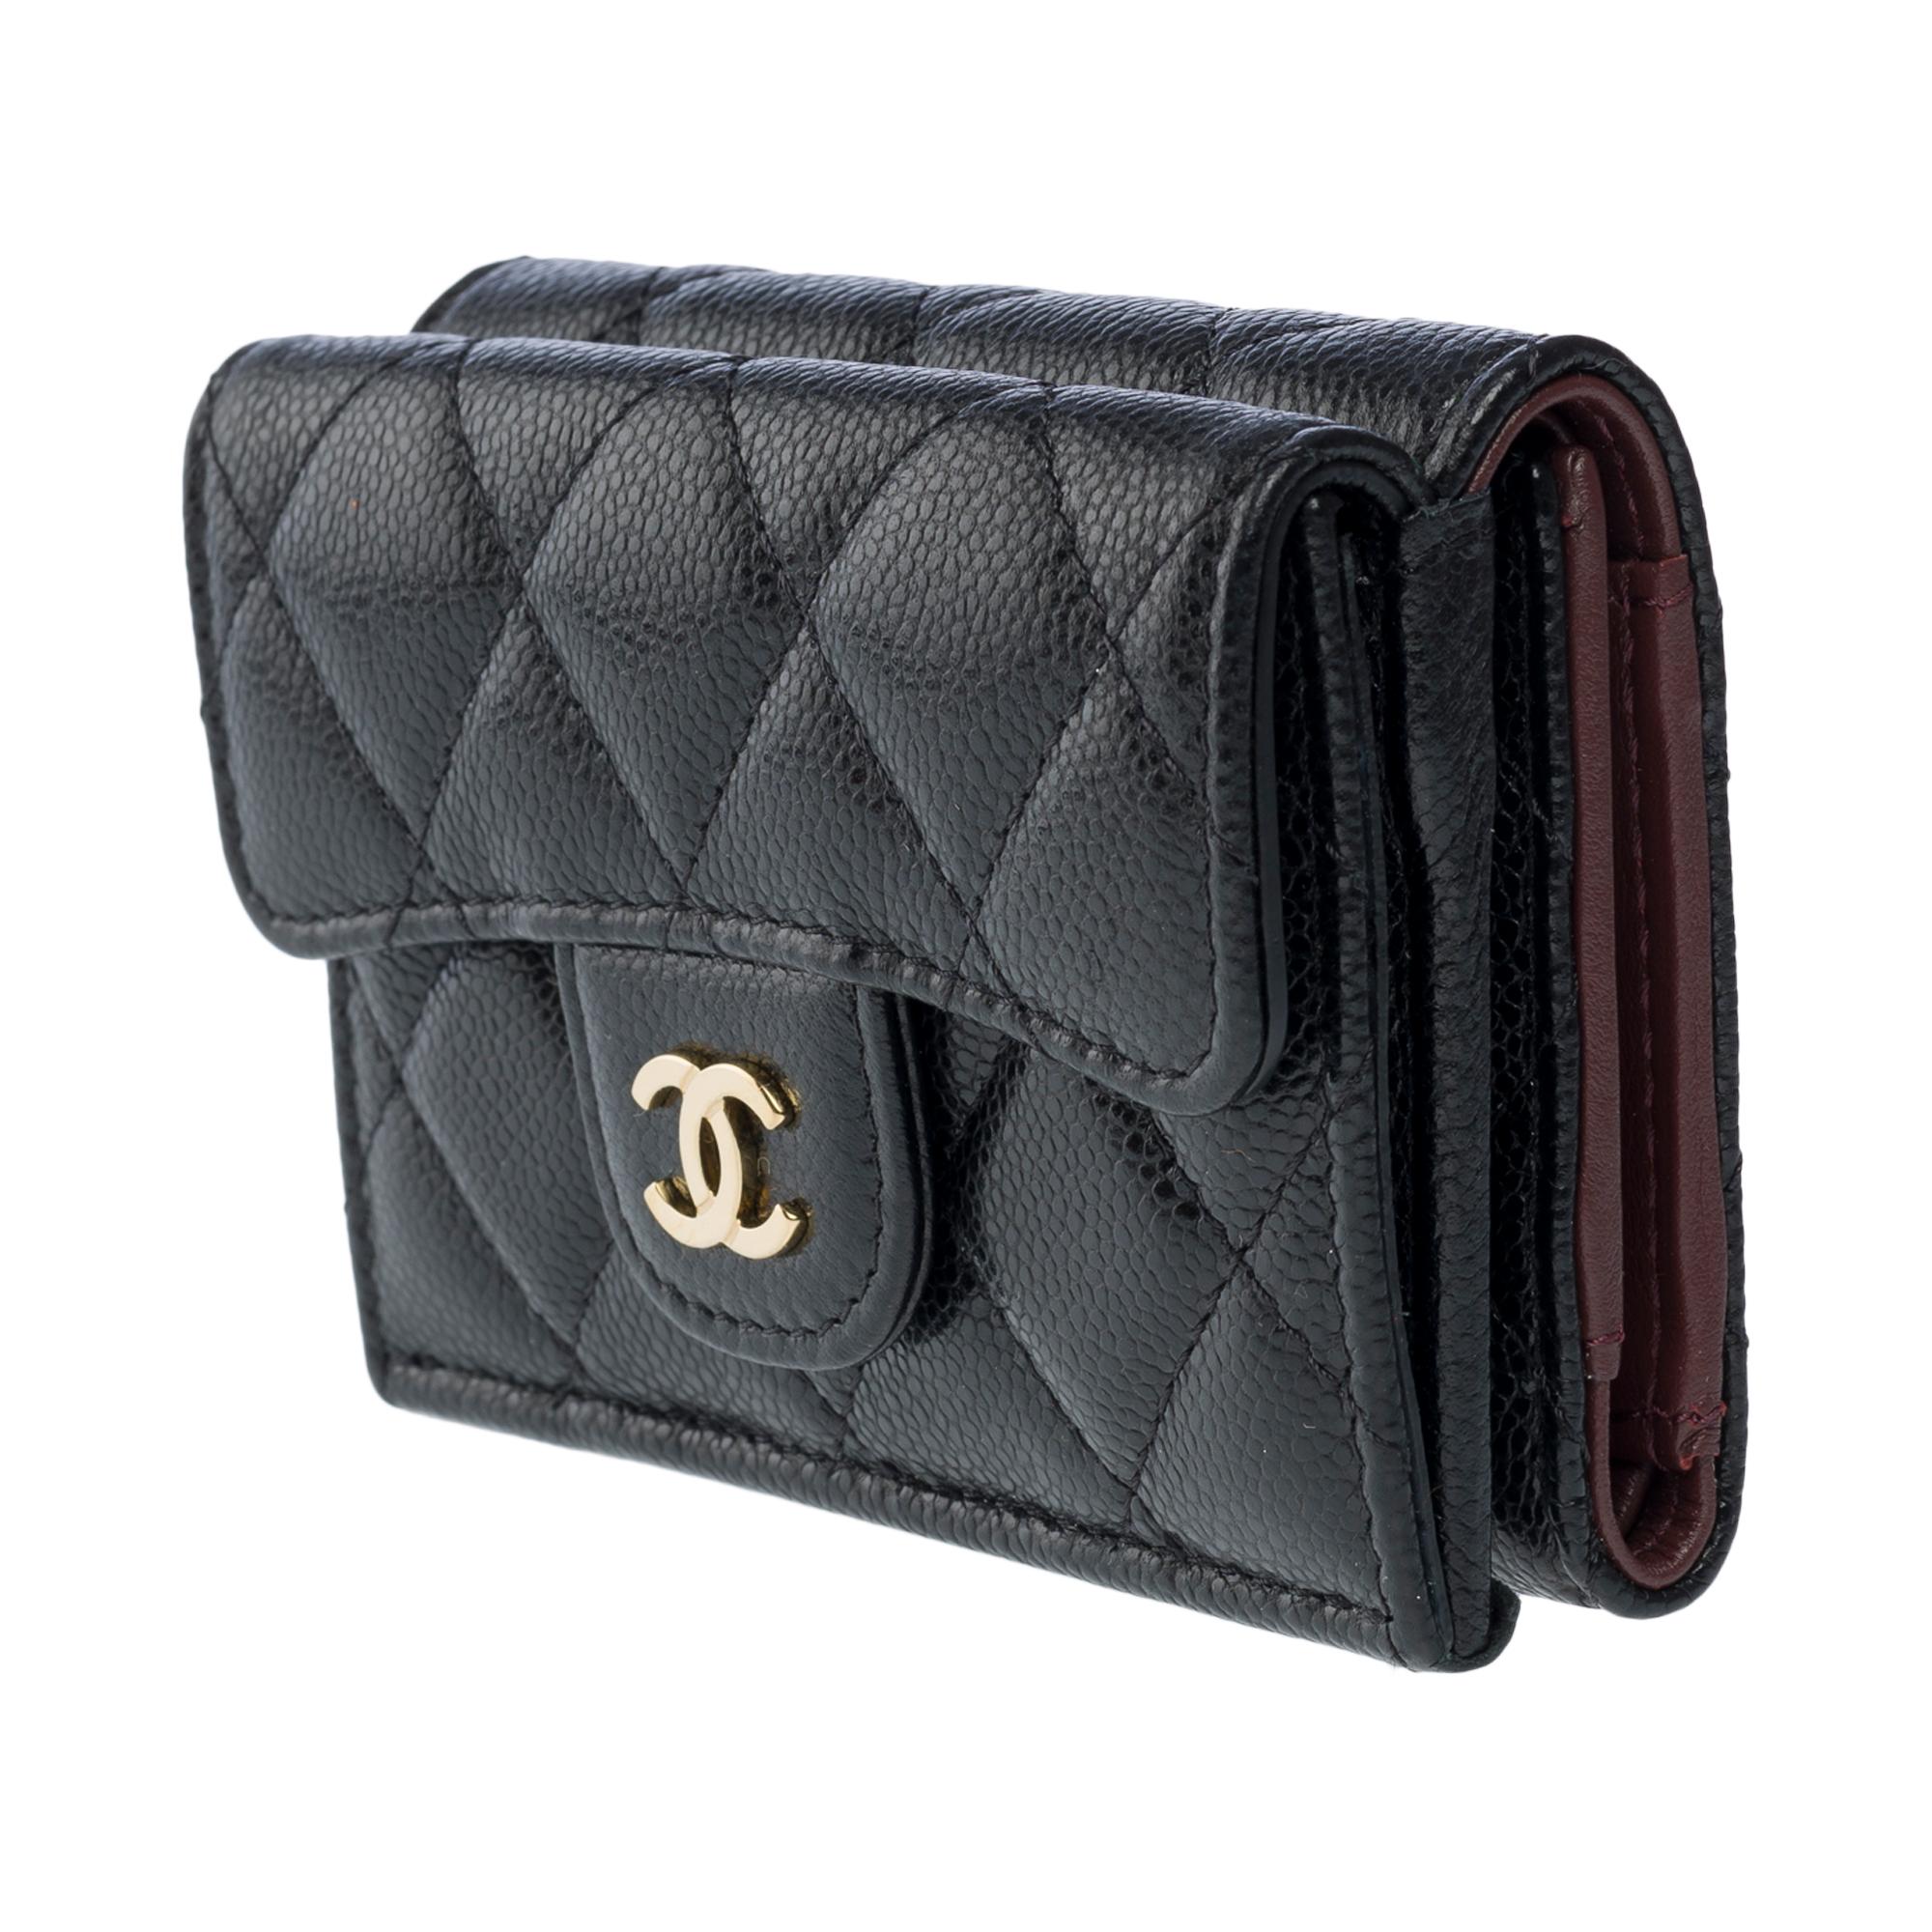 Gorgeous Chanel Wallet  in black Caviar quilted leather, GHW 1